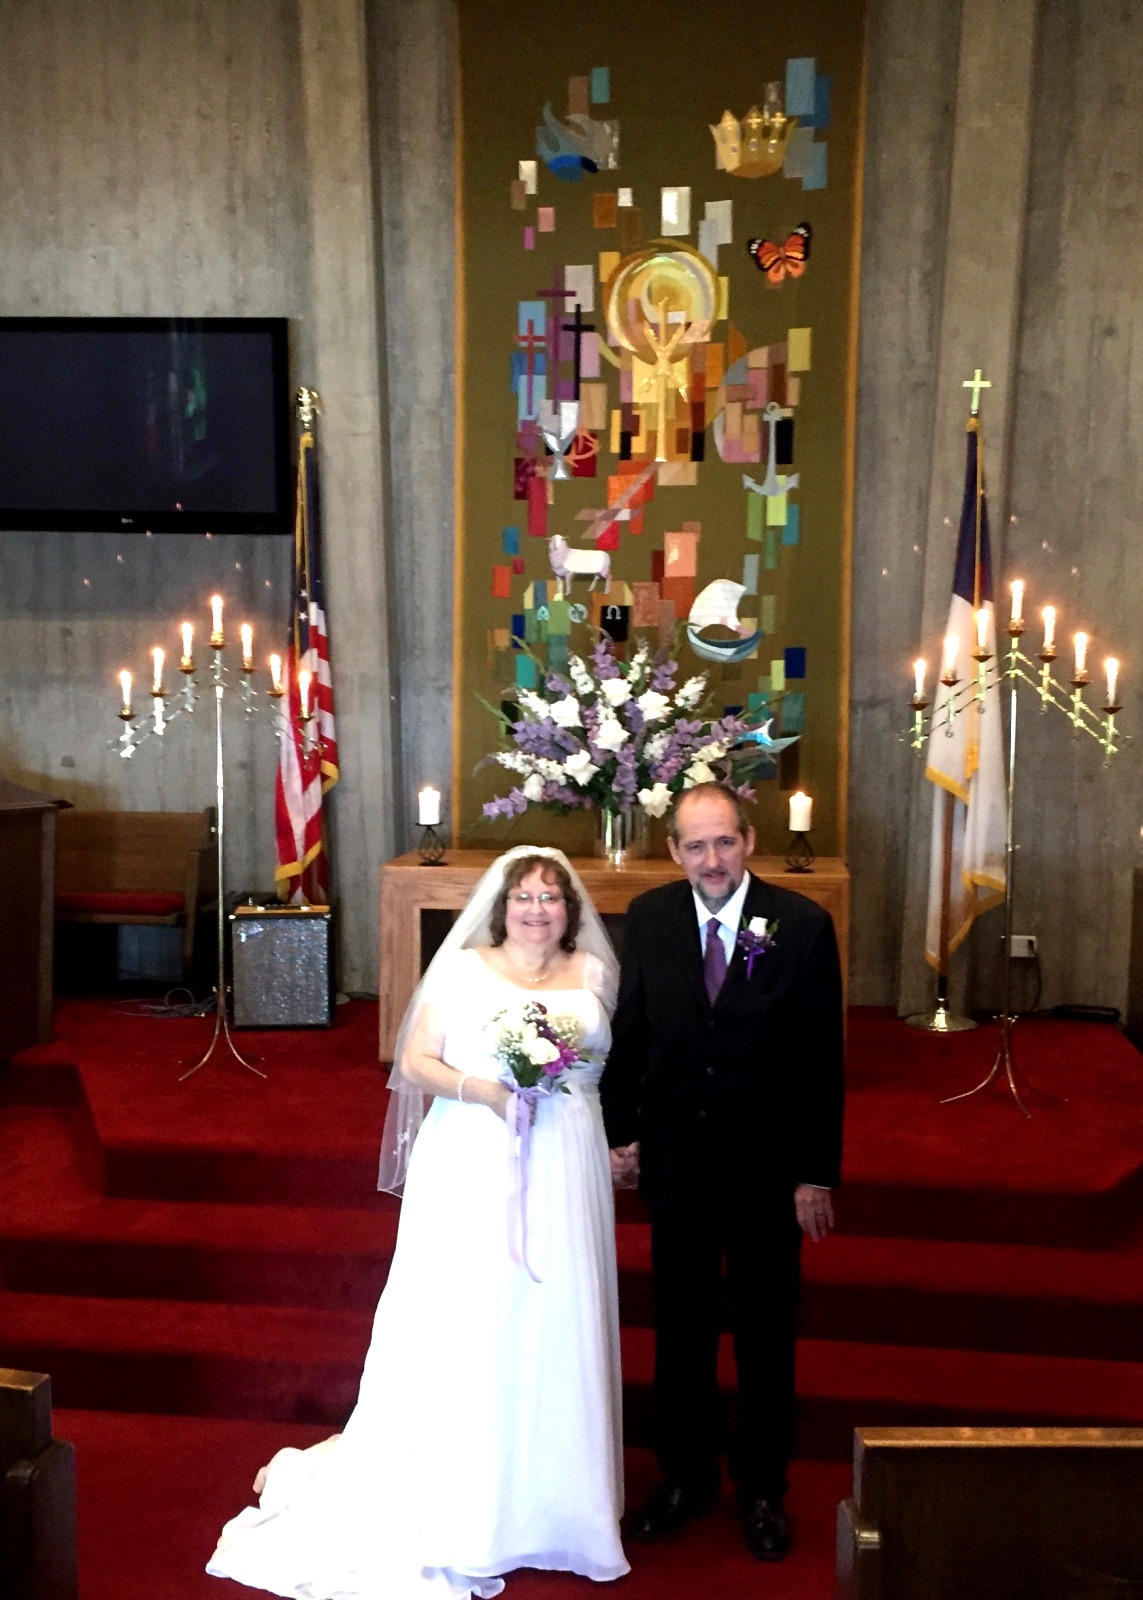 we got married on March 24, 2019 in the GGUMC Chapel...amen to God!